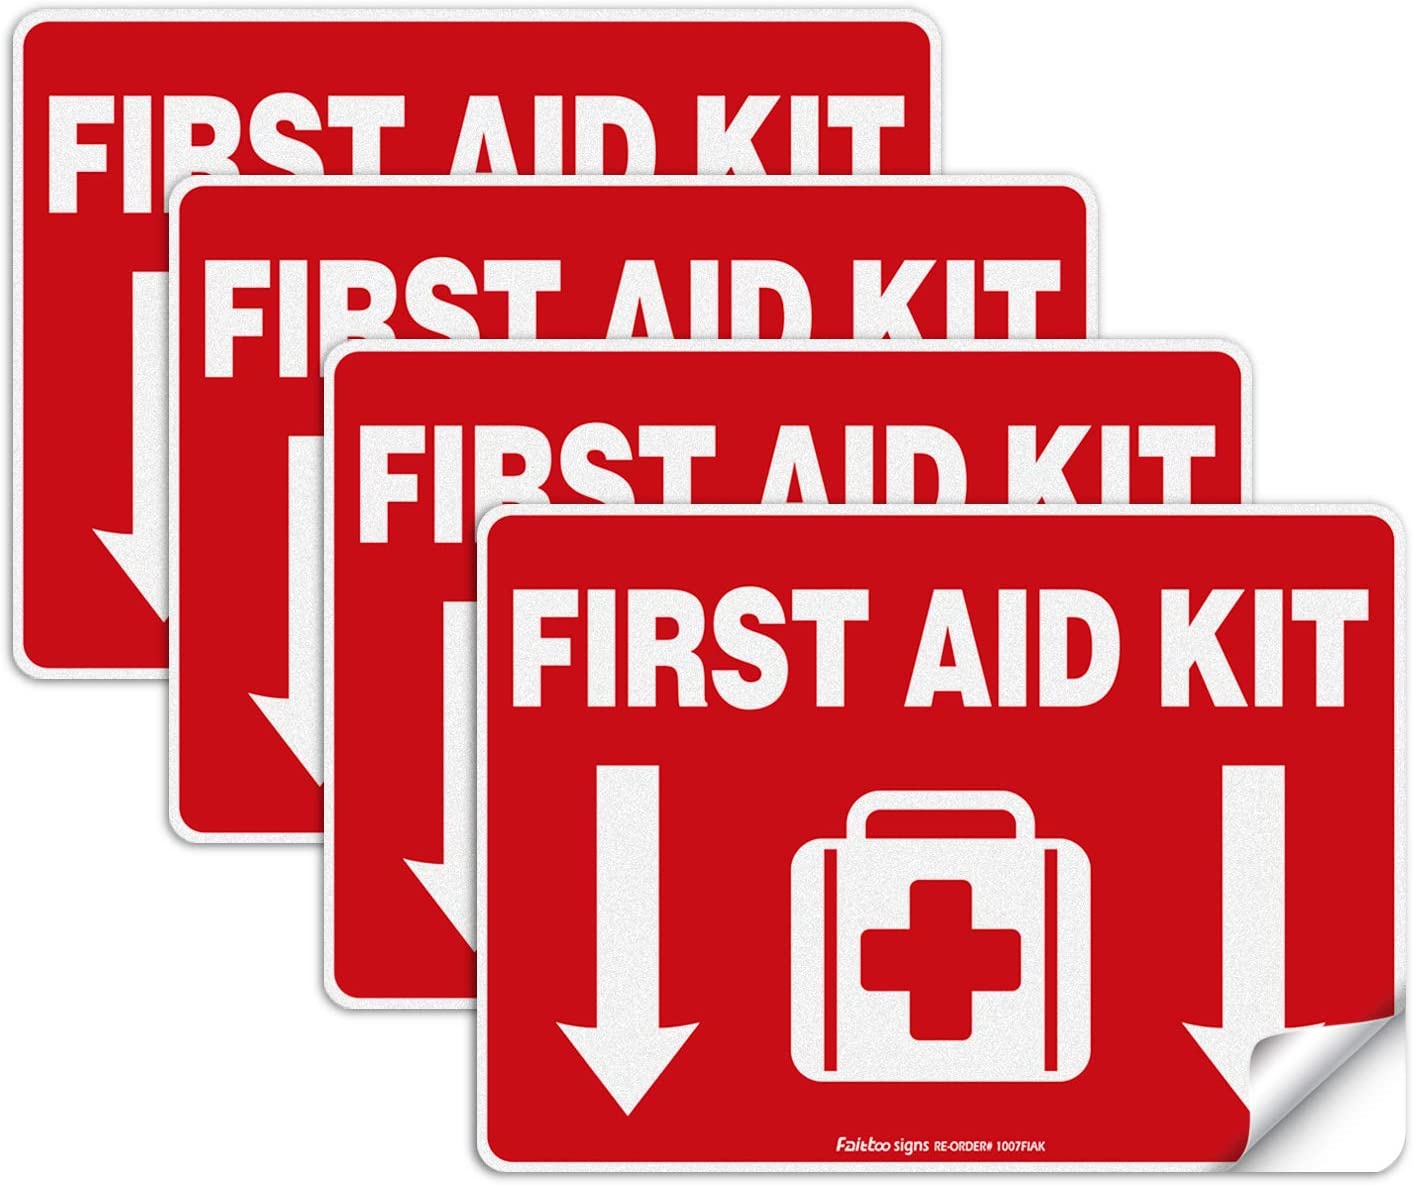 First Aid Kit Sticker, First Aid Kit Sticker Decal for Home, Schools and Business, 4 Pack, 10 x 7 inch Self-Adhesive Vinyl Decal Stickers, Reflective, UV Protected, Waterproof